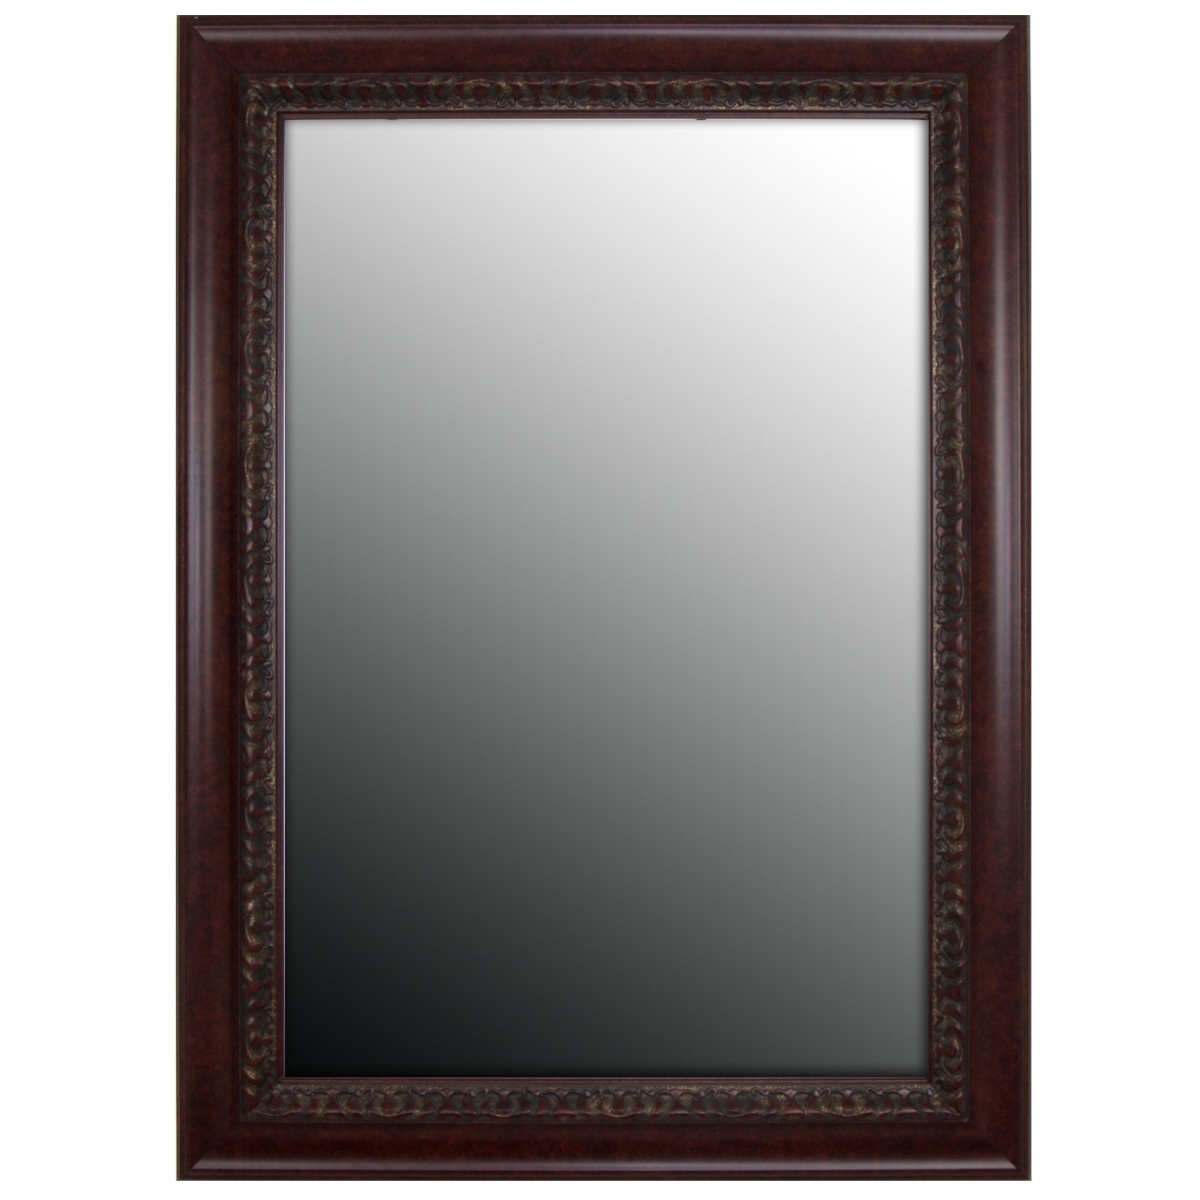 Hitchcock Butterfield 808401 Cherry Williamsburg Wall Mirror - 25 X 61 In.